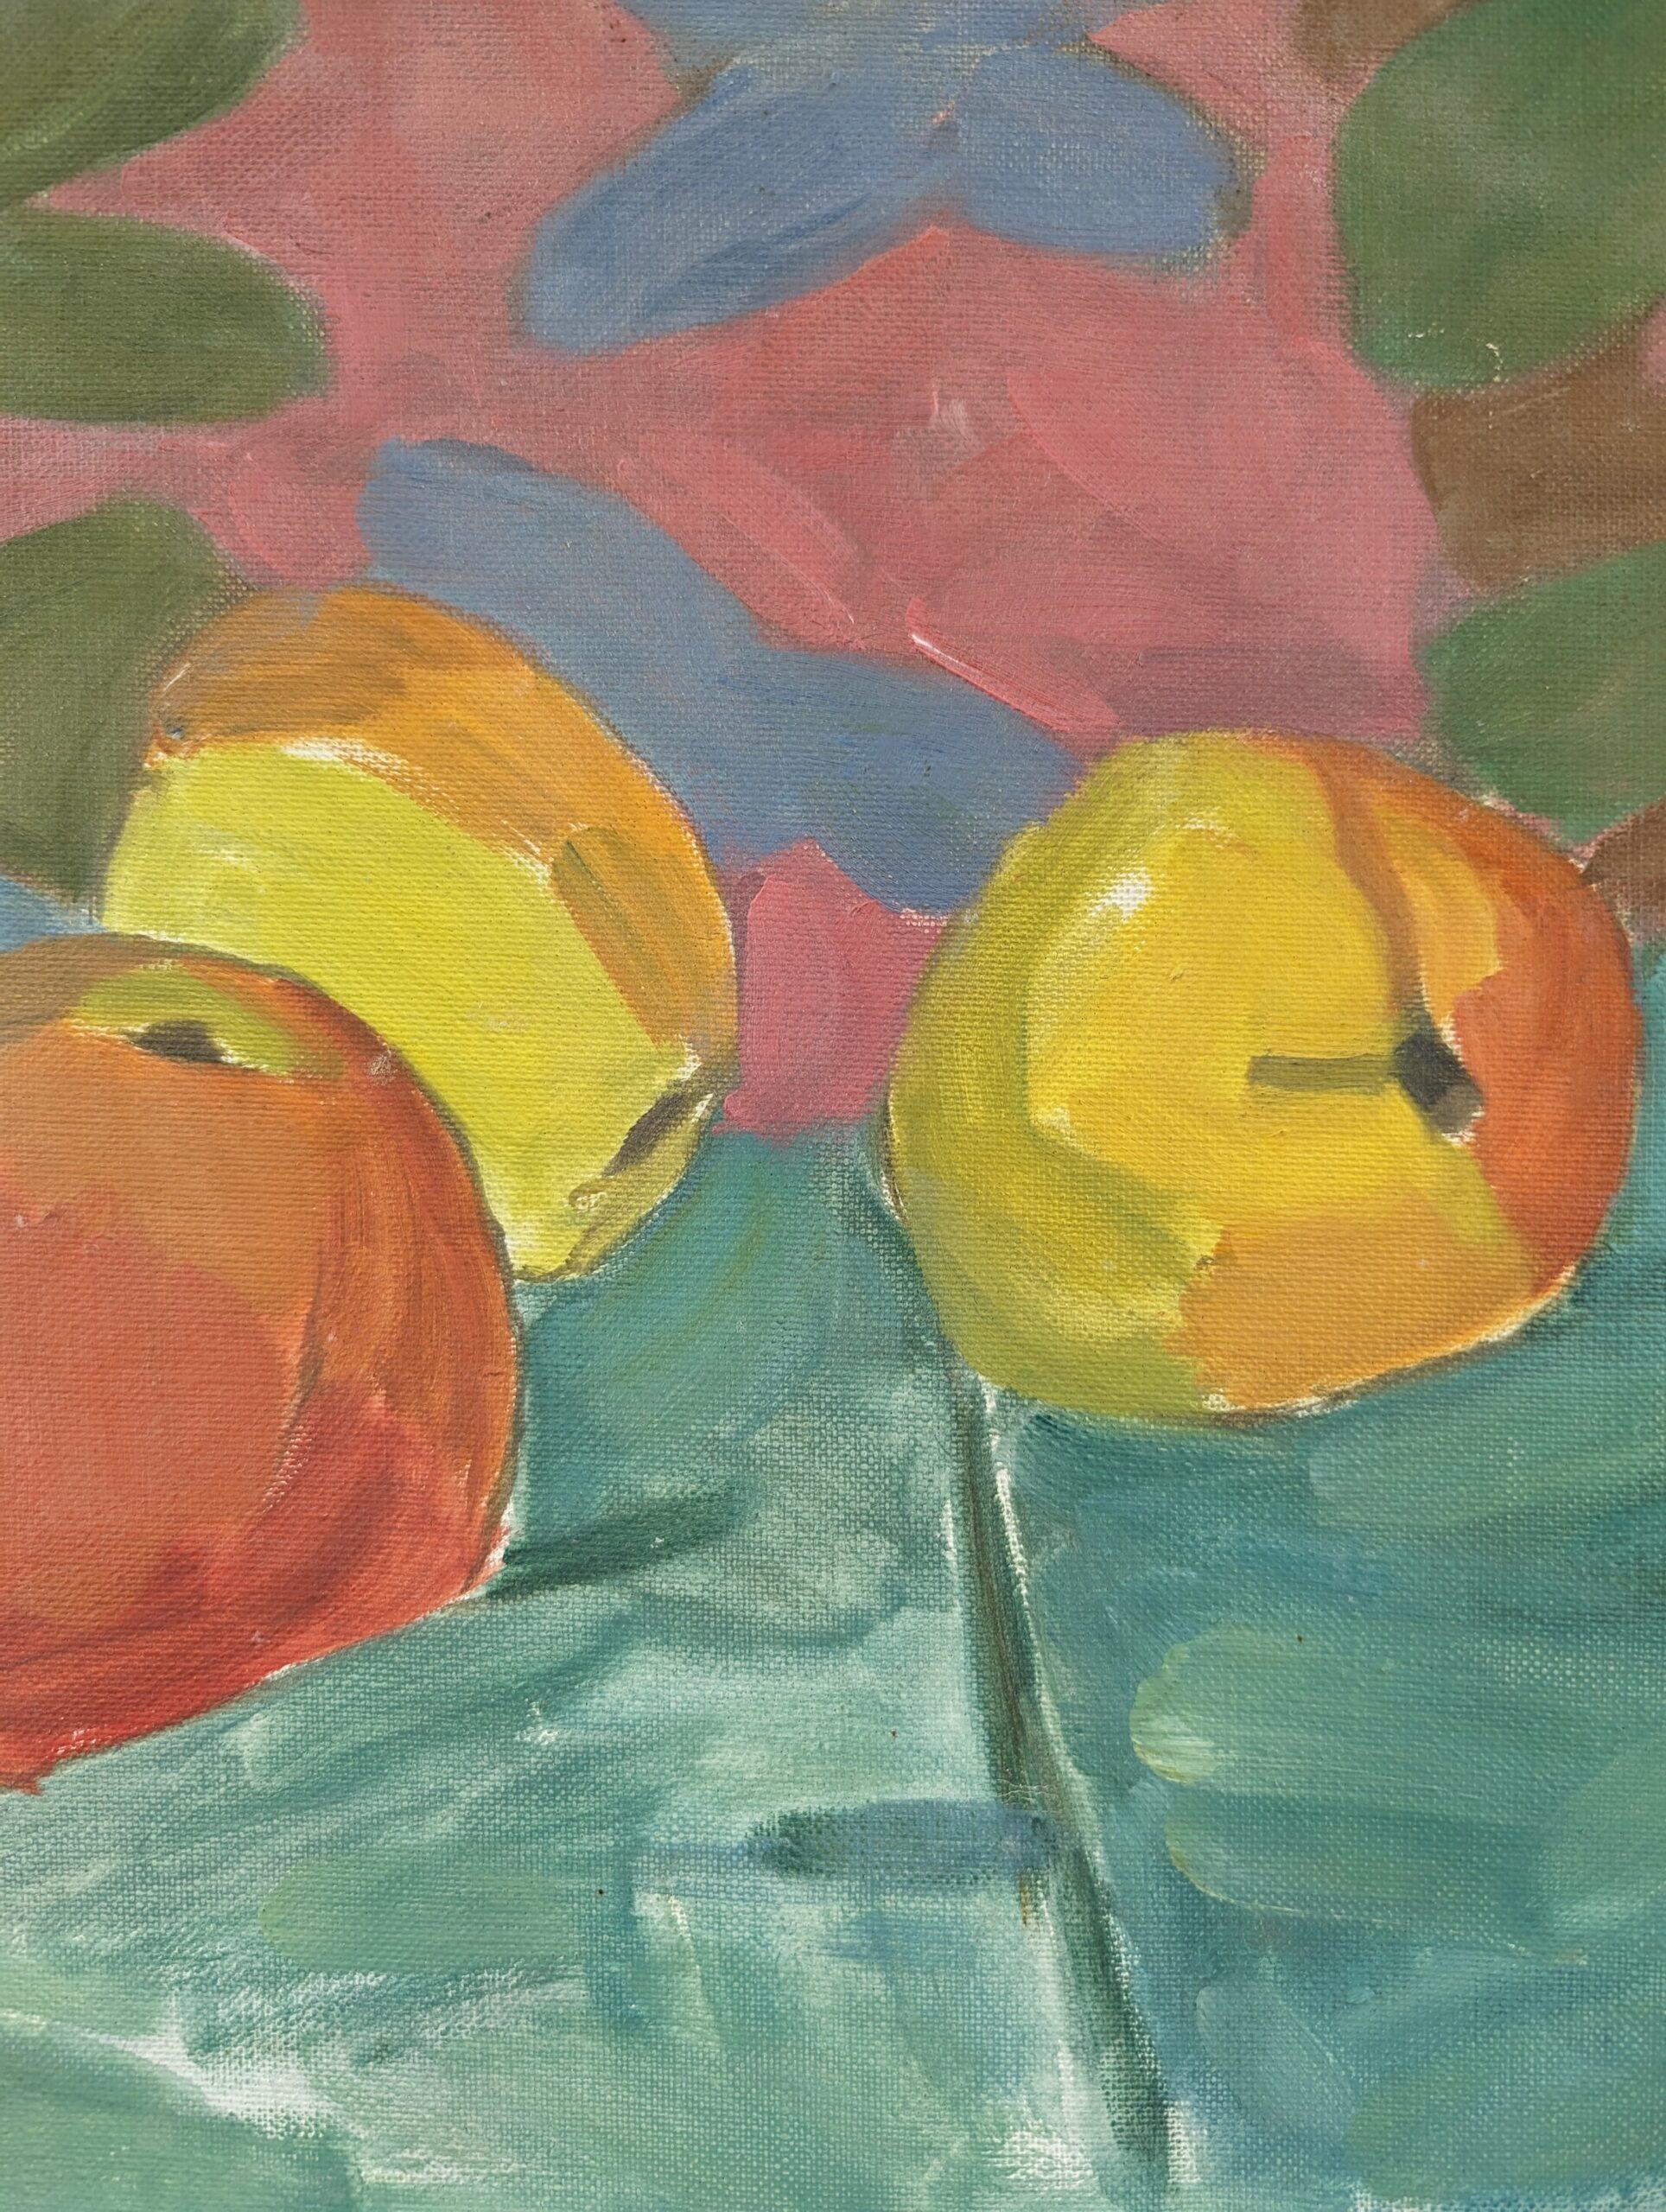 1974 Mid-Century Modern Still Life Oil Painting by Ture Fabiansson - Four Apples 10